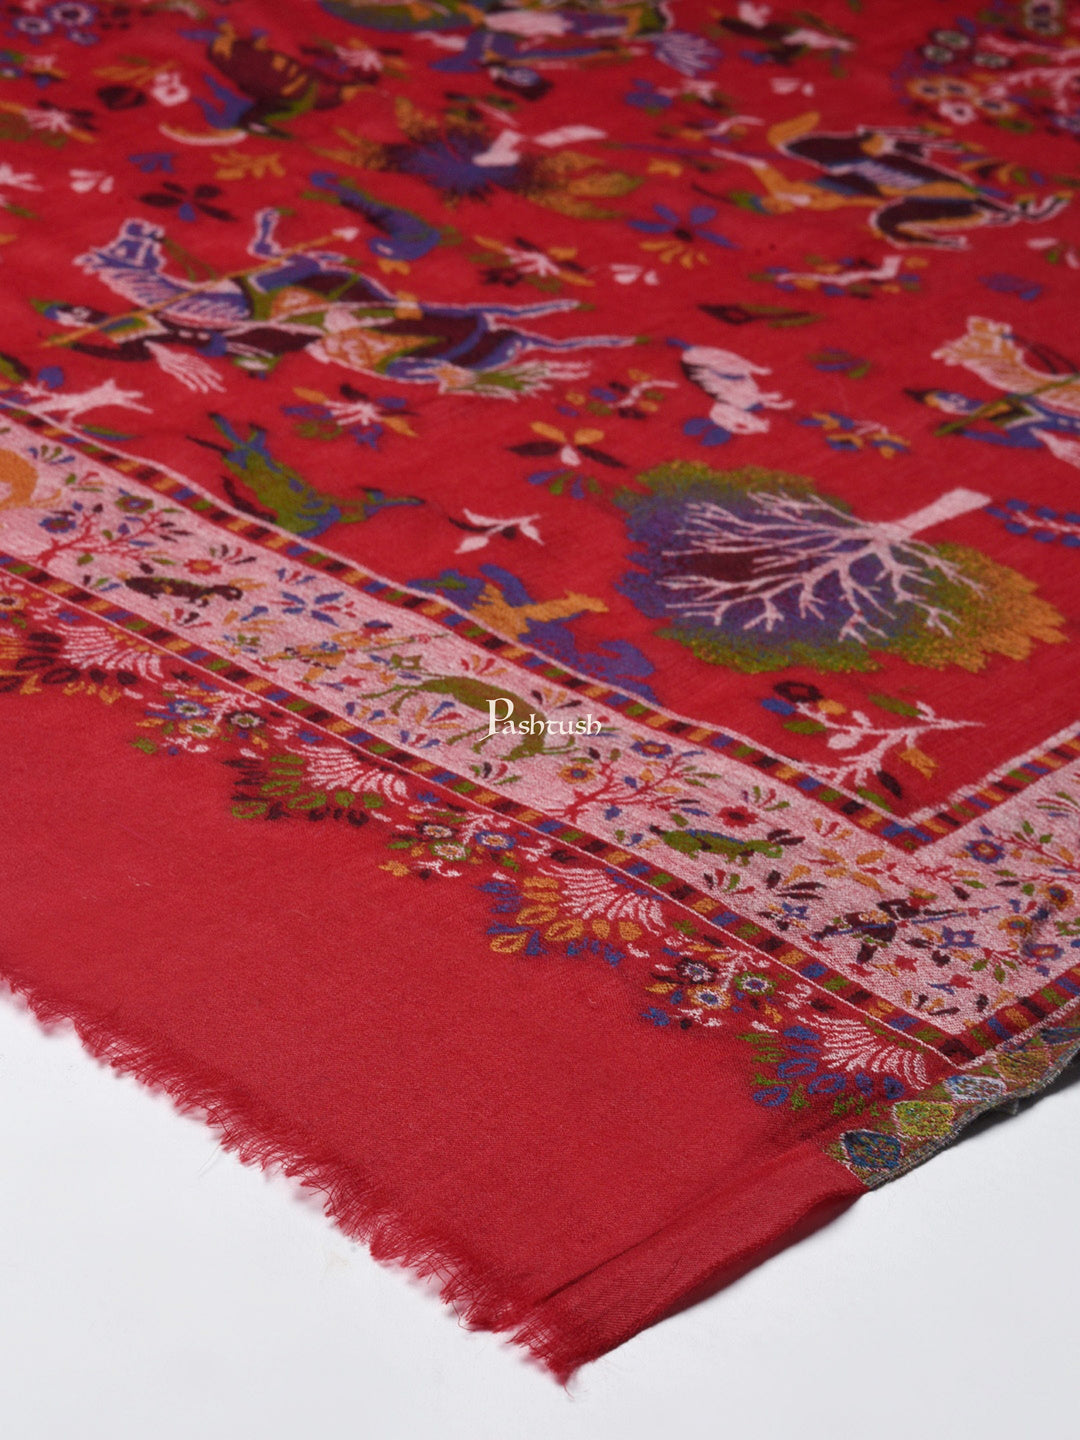 Pashtush India Gift Pack Pashtush His And Her Set Of 100% Pure Wool Printed Stole and Shikaardar Shawl With Wooden Chester Box, Multicolour and Red